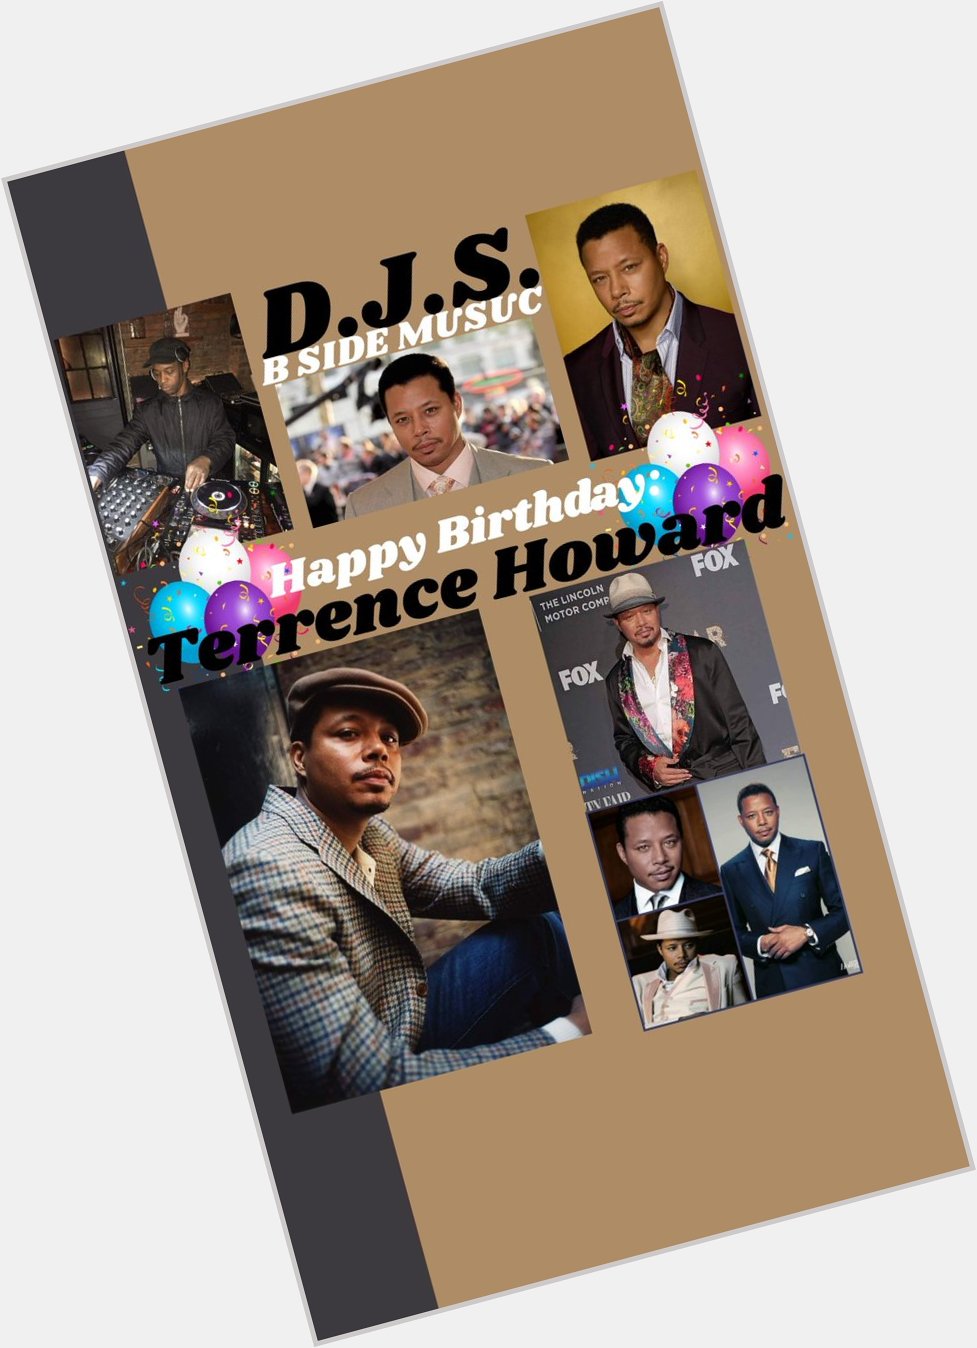 I(D.J.S.)\"B SIDE MUSIC\" saying Happy Birthday to Actor: \"TERRENCE HOWARD\"!!! 